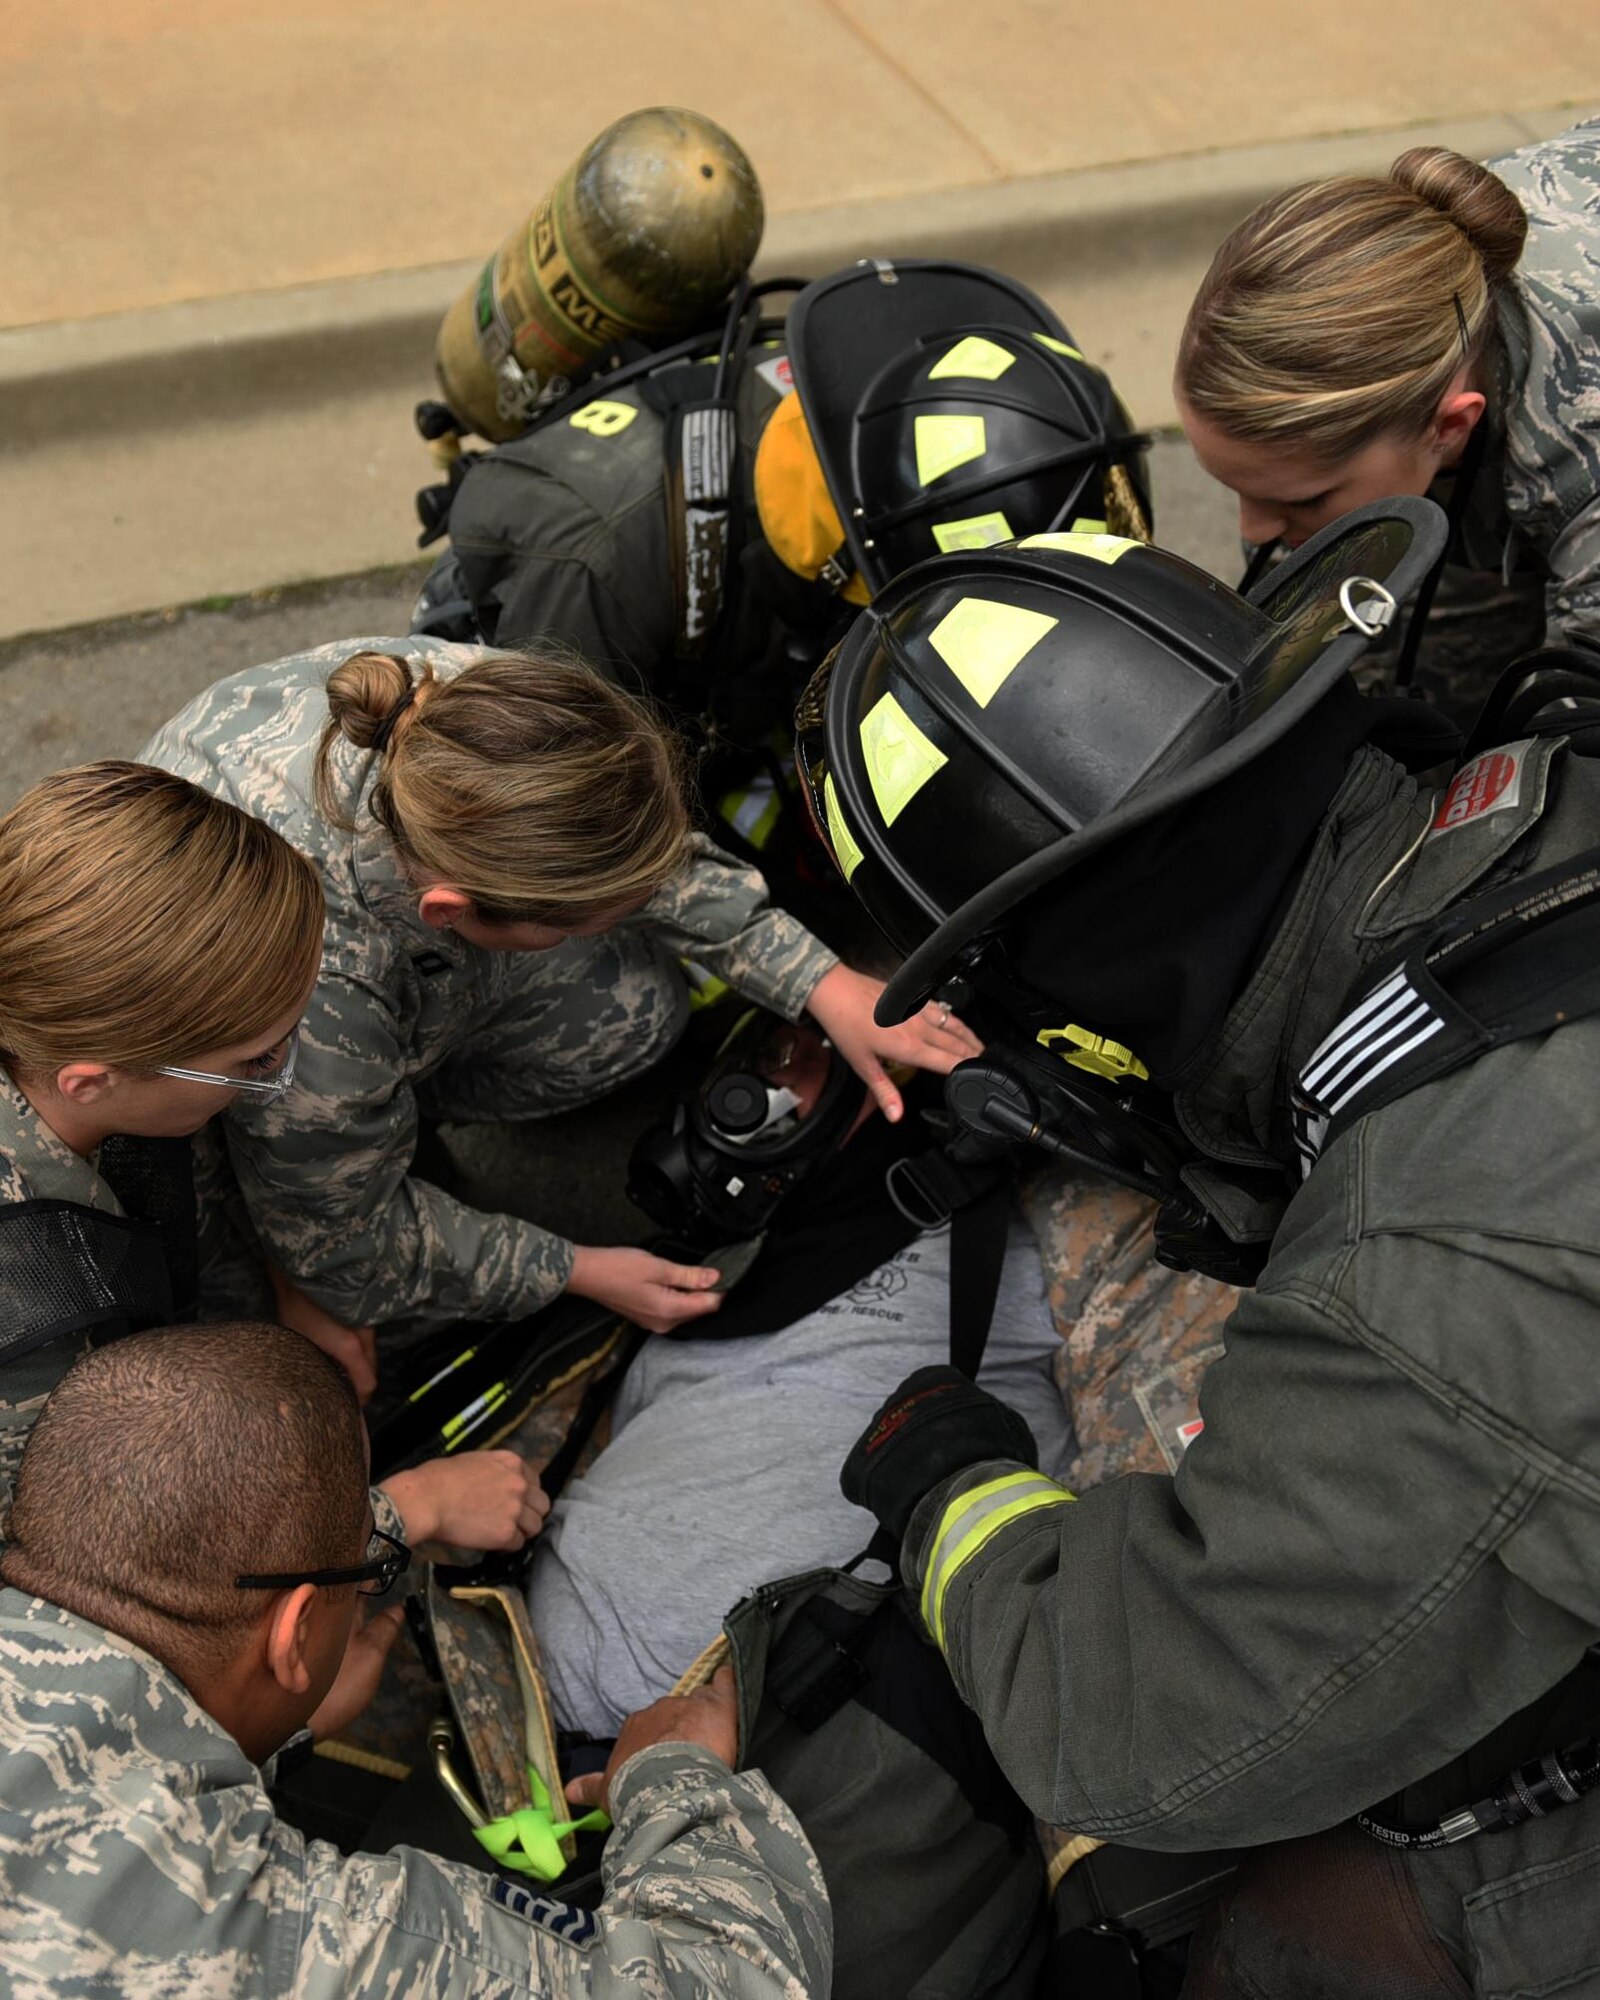 Members of the 19th Aerospace Medicine Squadron check vitals on U.S. Air Force Michael Leger, 19th Civil Engineer Squadron Fire Department firefighter, during a major accident response inspection March 30, 2017, at the Jacksonville Fire Department Training Center, Ark. The 19th AMDS response team was responsible for stabilizing patients, checking their vitals, and coordinating transfers to the emergency room. (U.S. Air Force photo by Airman 1st Class Kevin Sommer Giron)